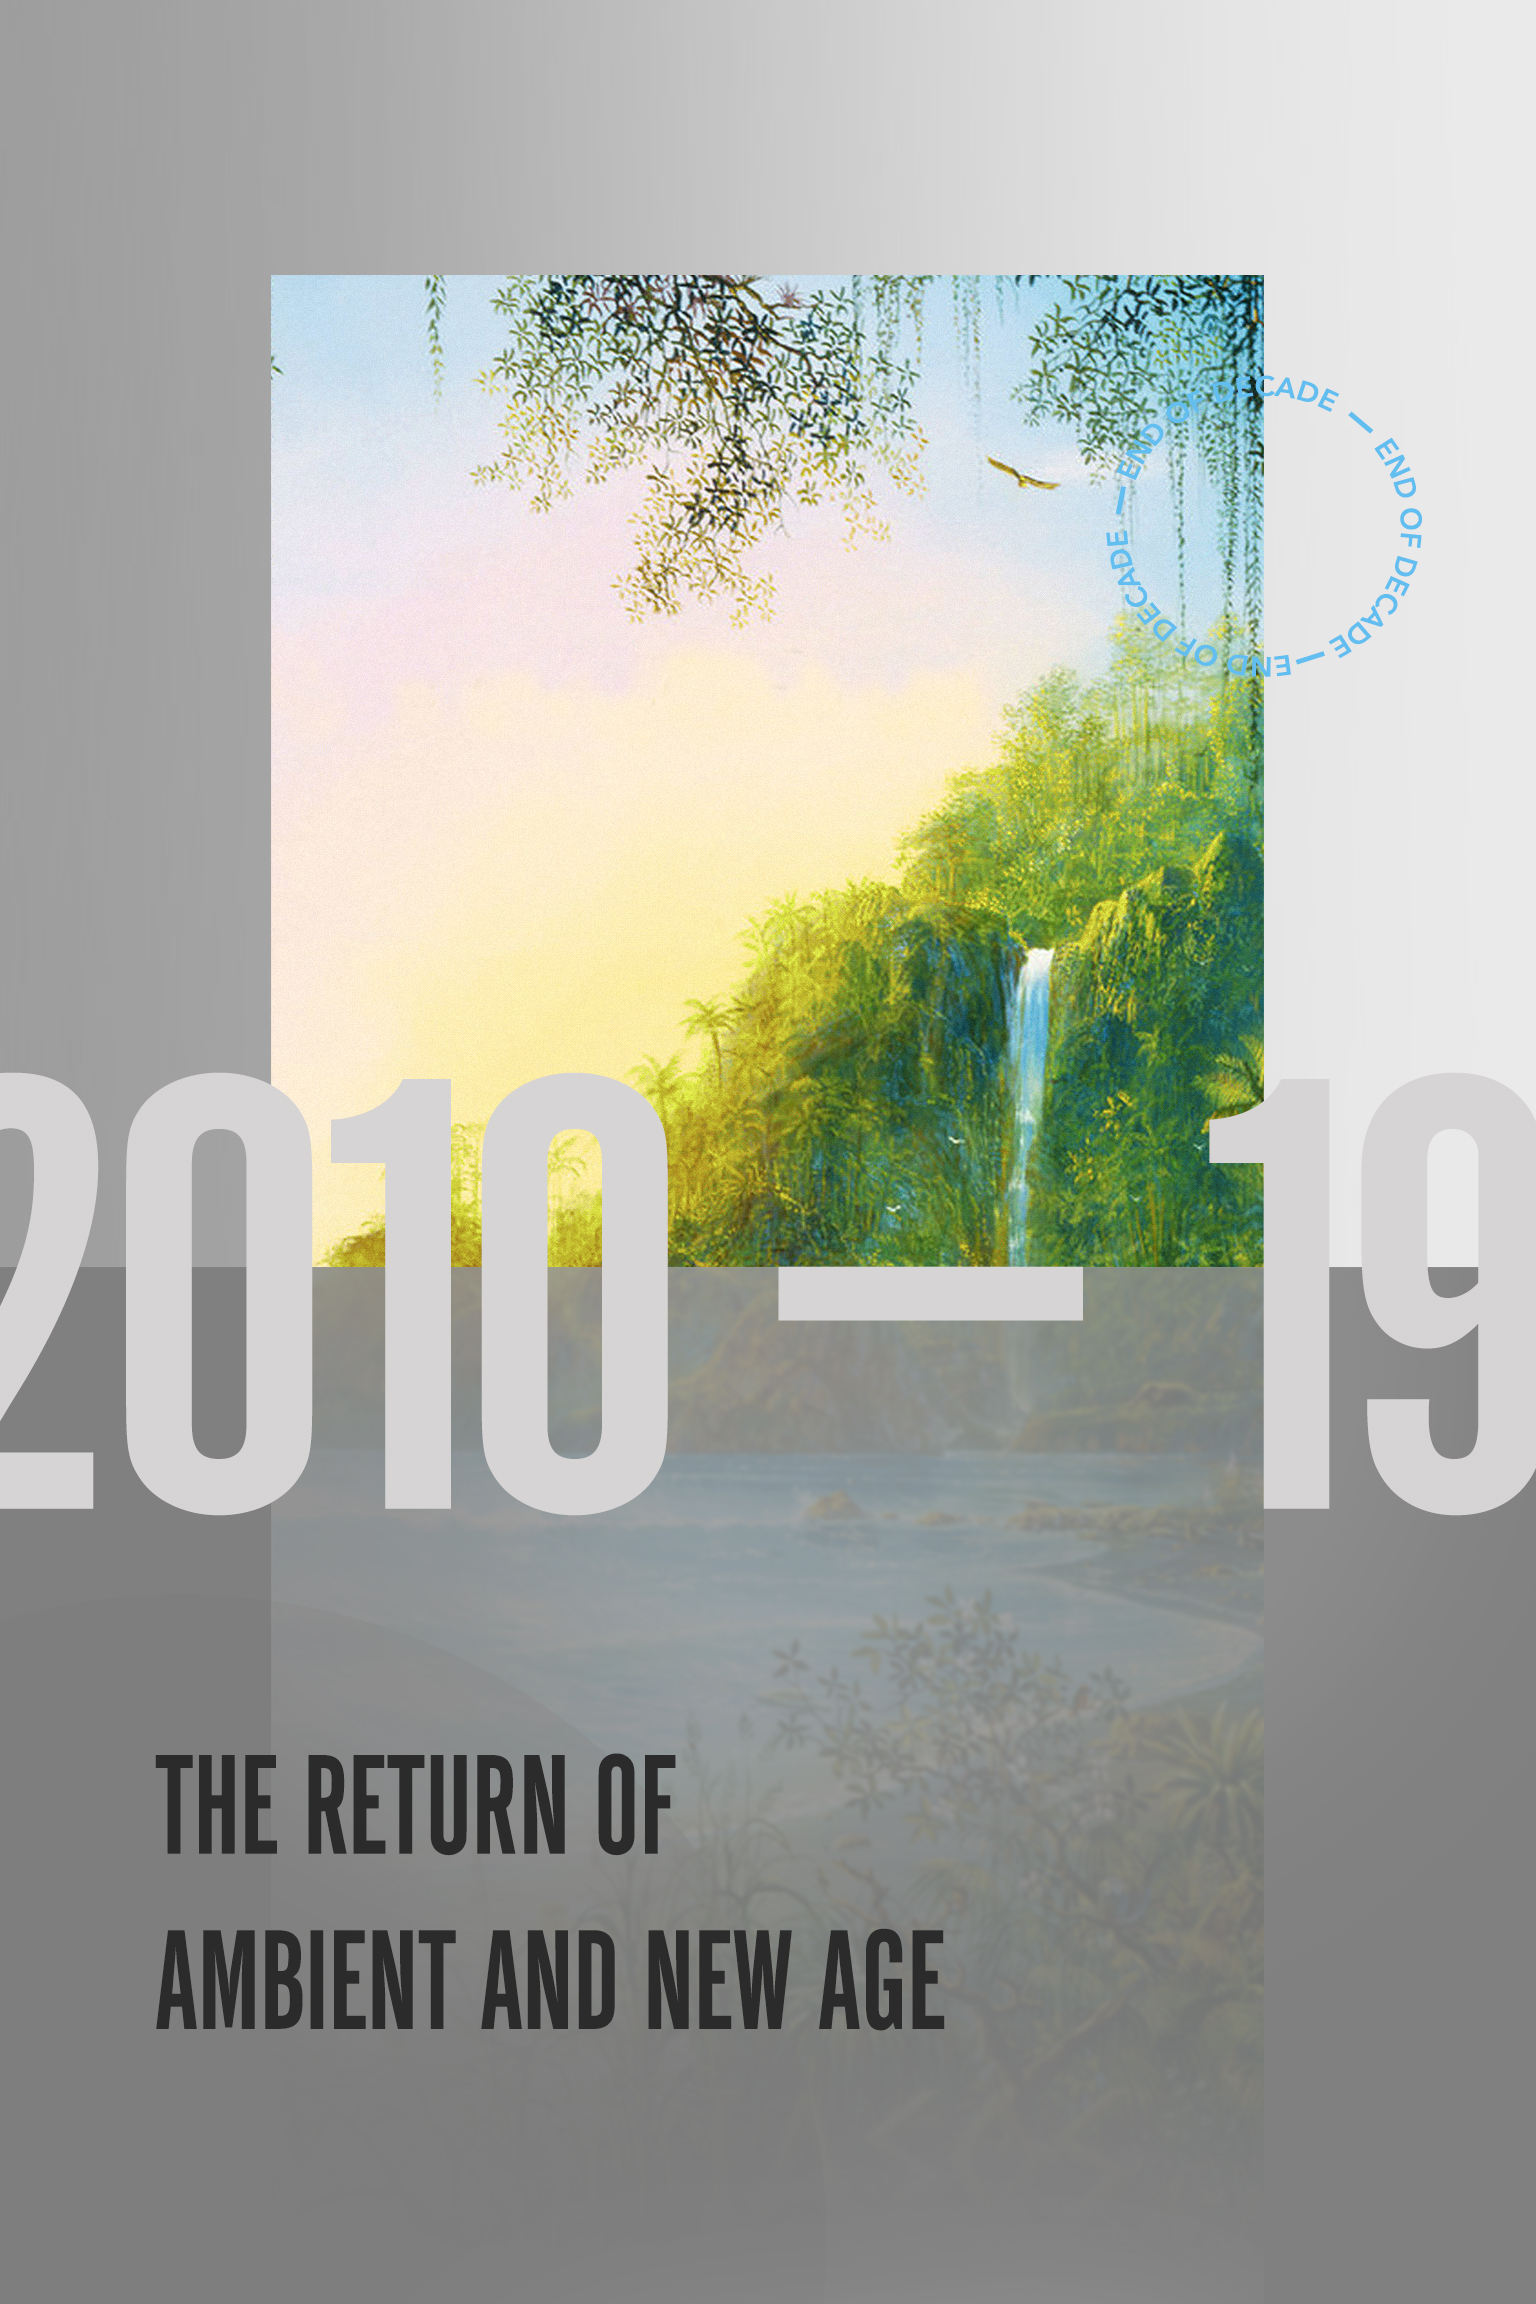 2010-19: Back To The Garden: The Return Of Ambient And New Age